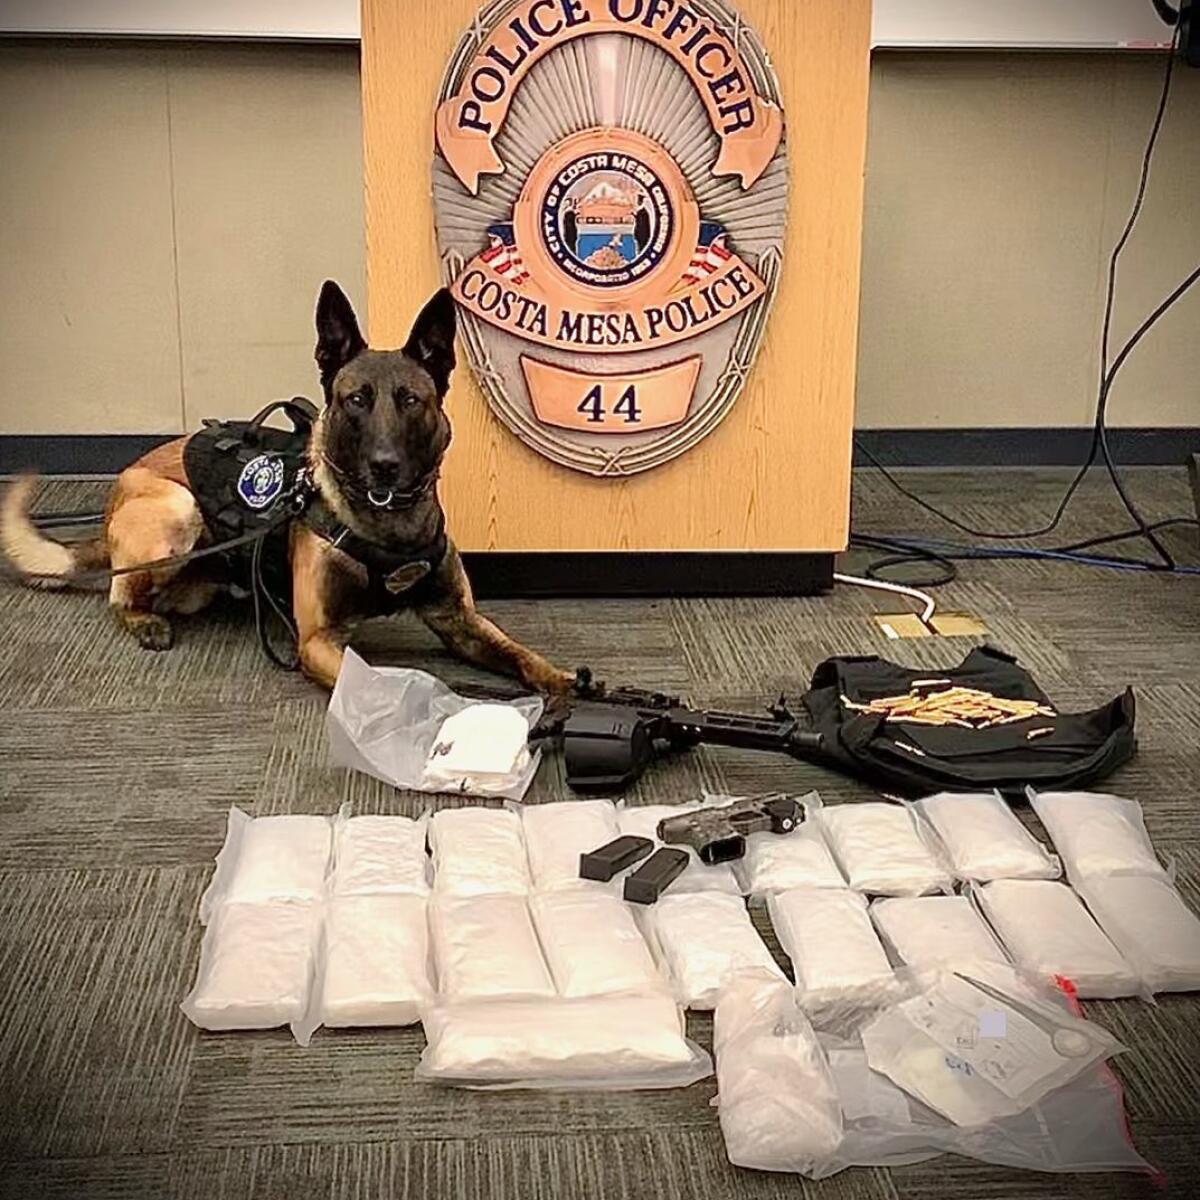 Police K-9s helped recover approximately 20 pounds of methamphetamine.